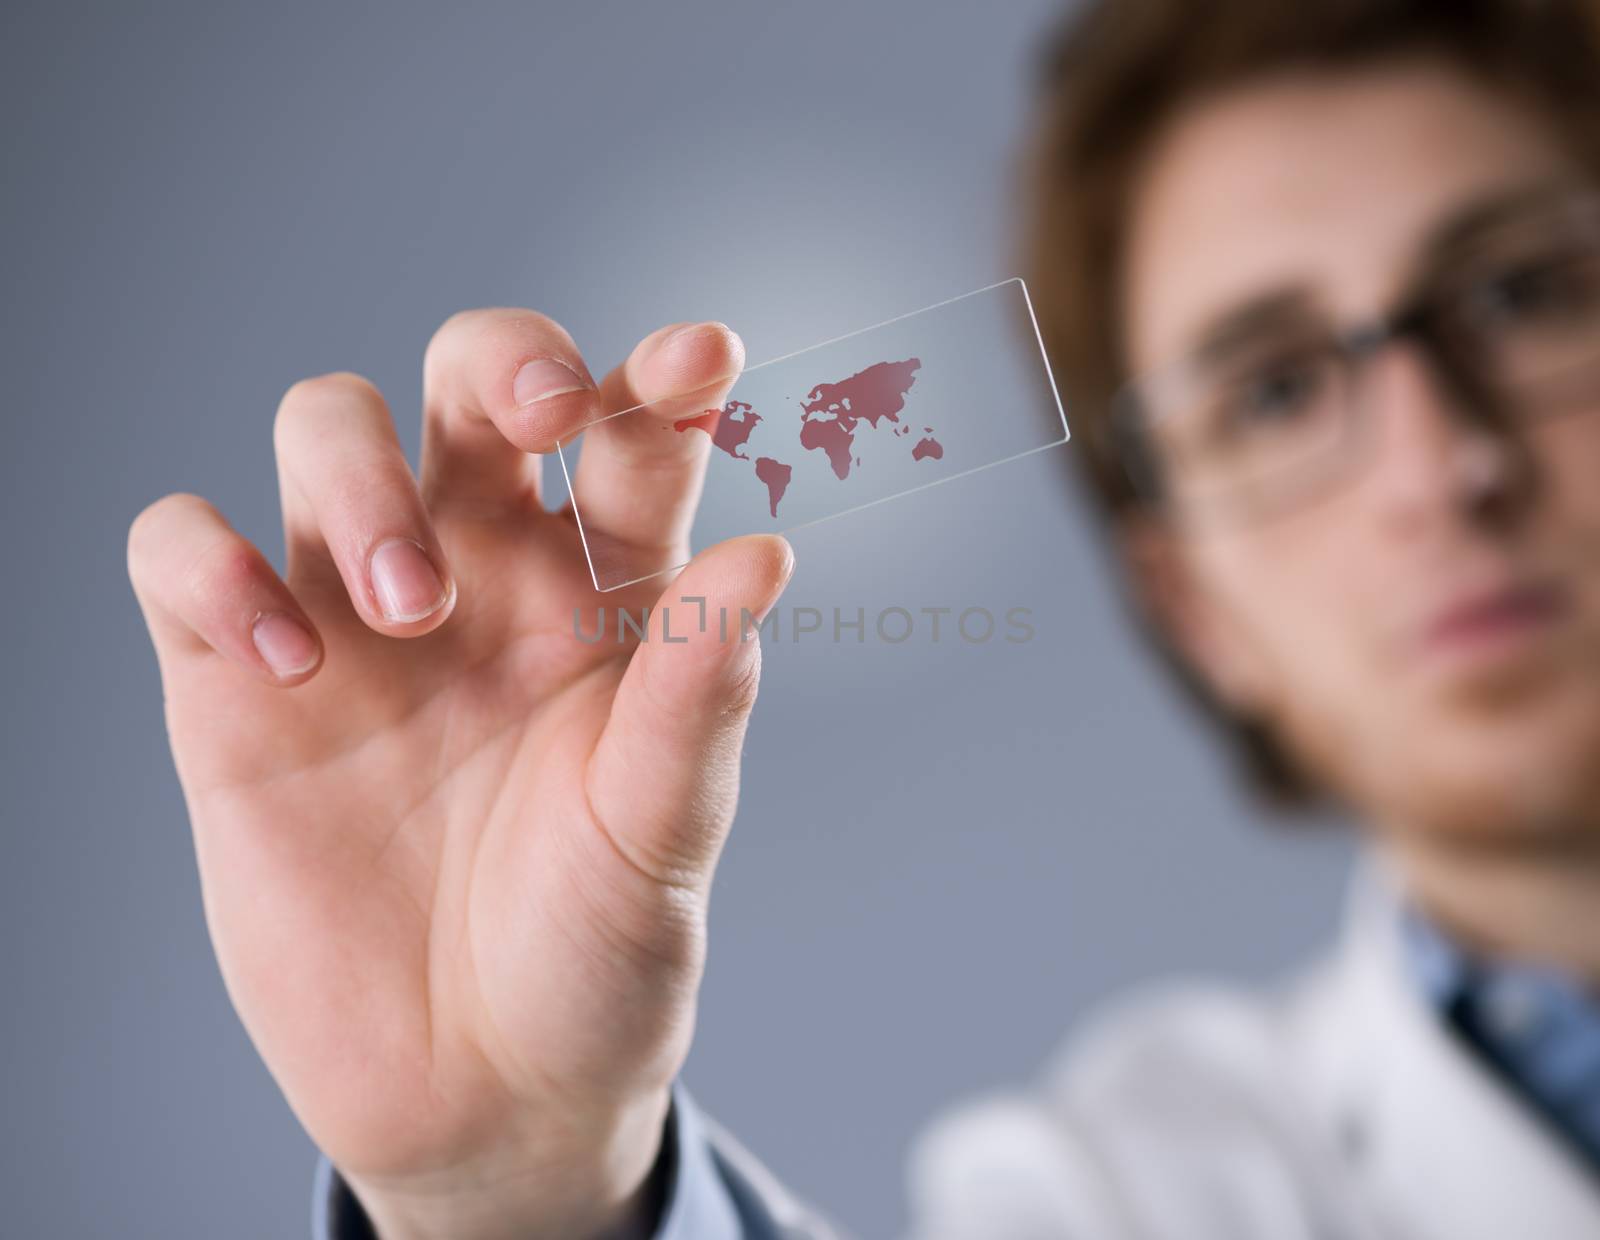 Researcher holding a microscope slide with world map.